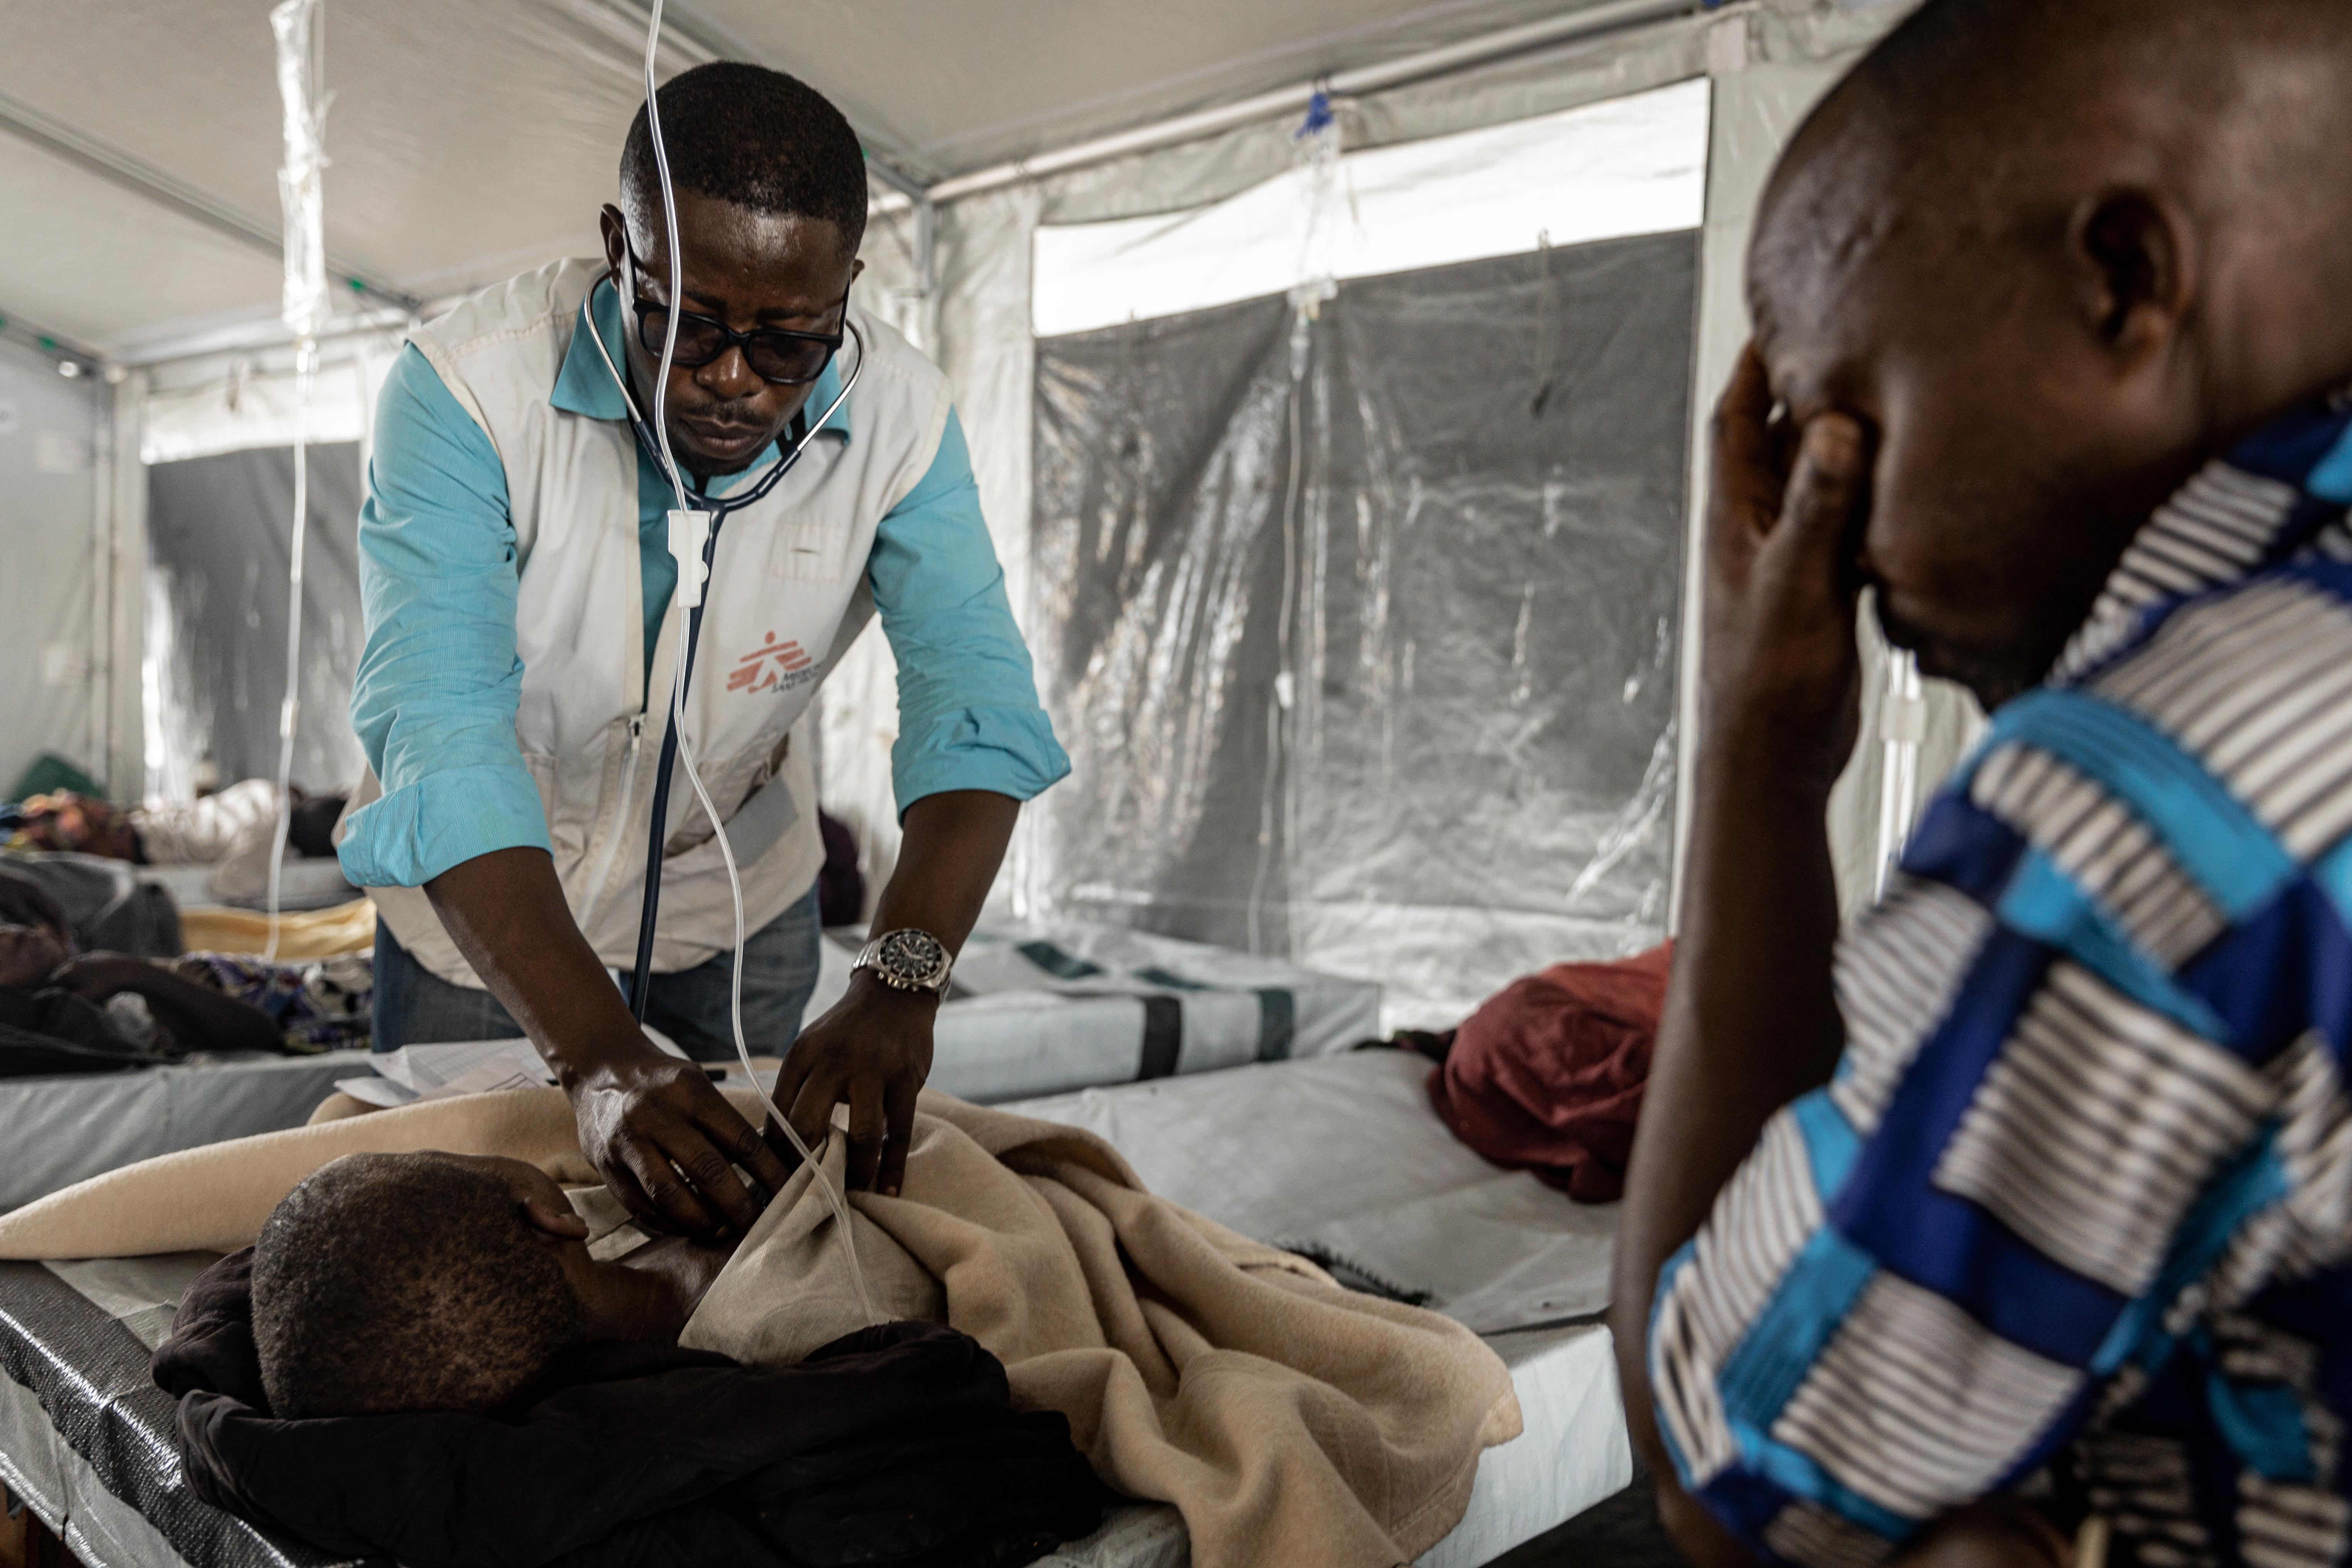 Image of an MSF Doctor treating a patient in the Democratic Republic of Congo